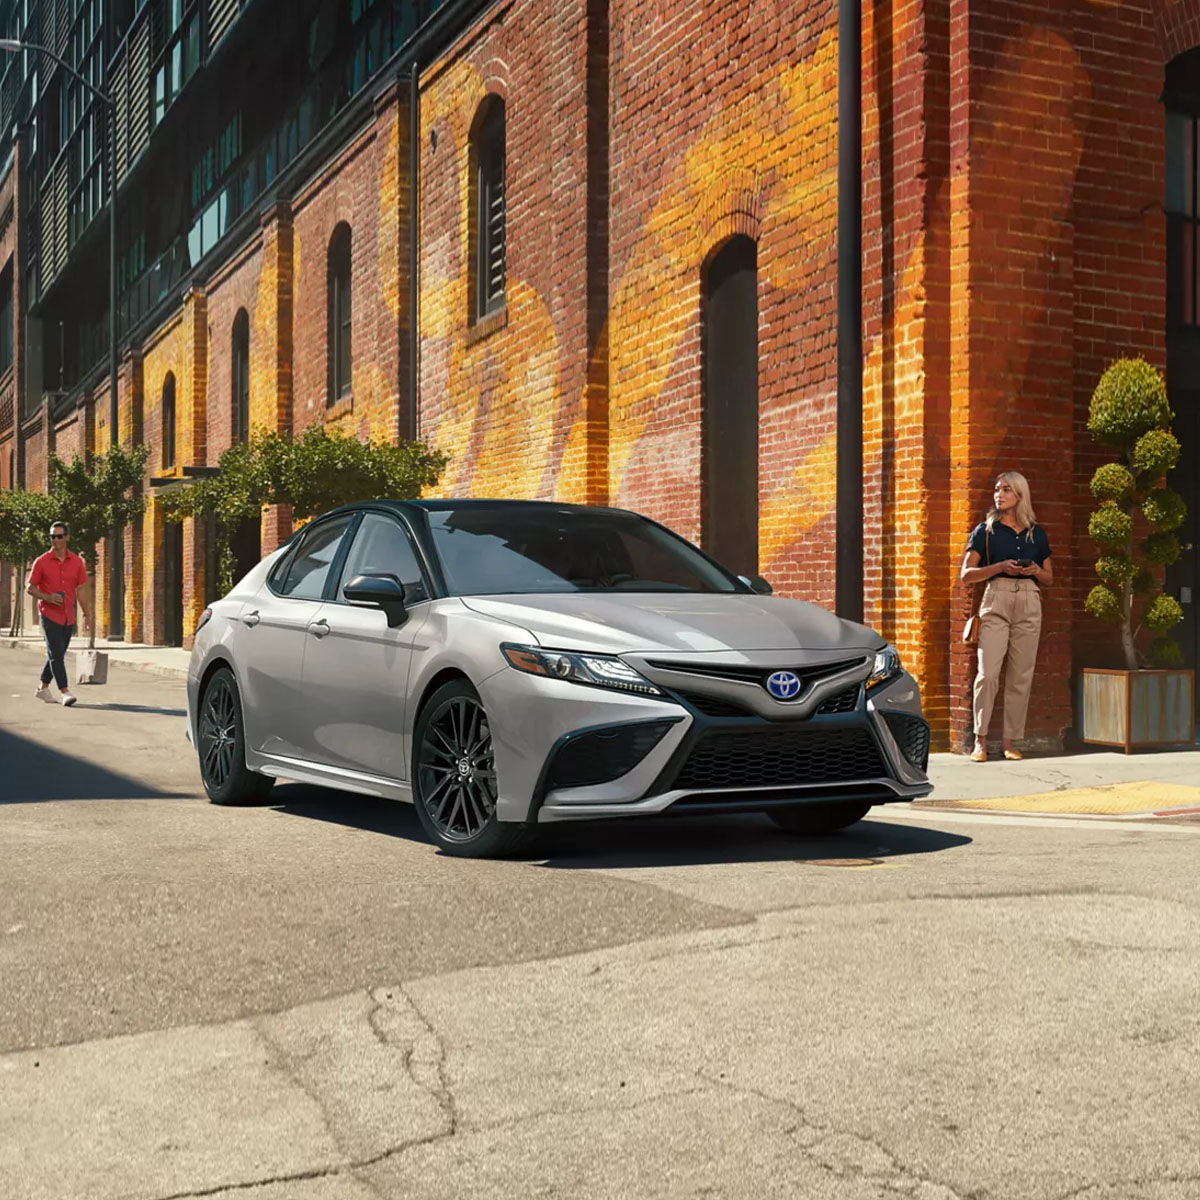 2022 Toyota Camry parked in a large garage